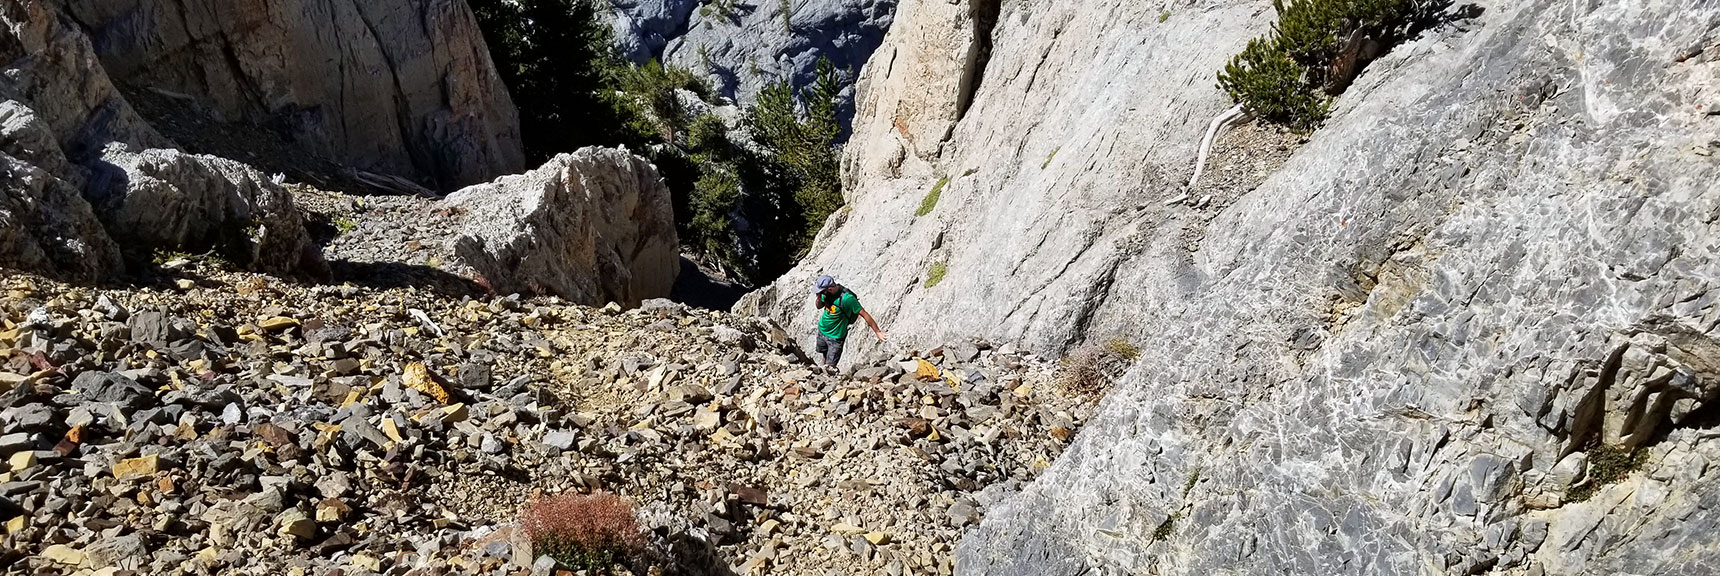 Heading Down V-Shaped Descent Canyon on West Side of Mummy Mt in Mt Charleston Wilderness, Nevada